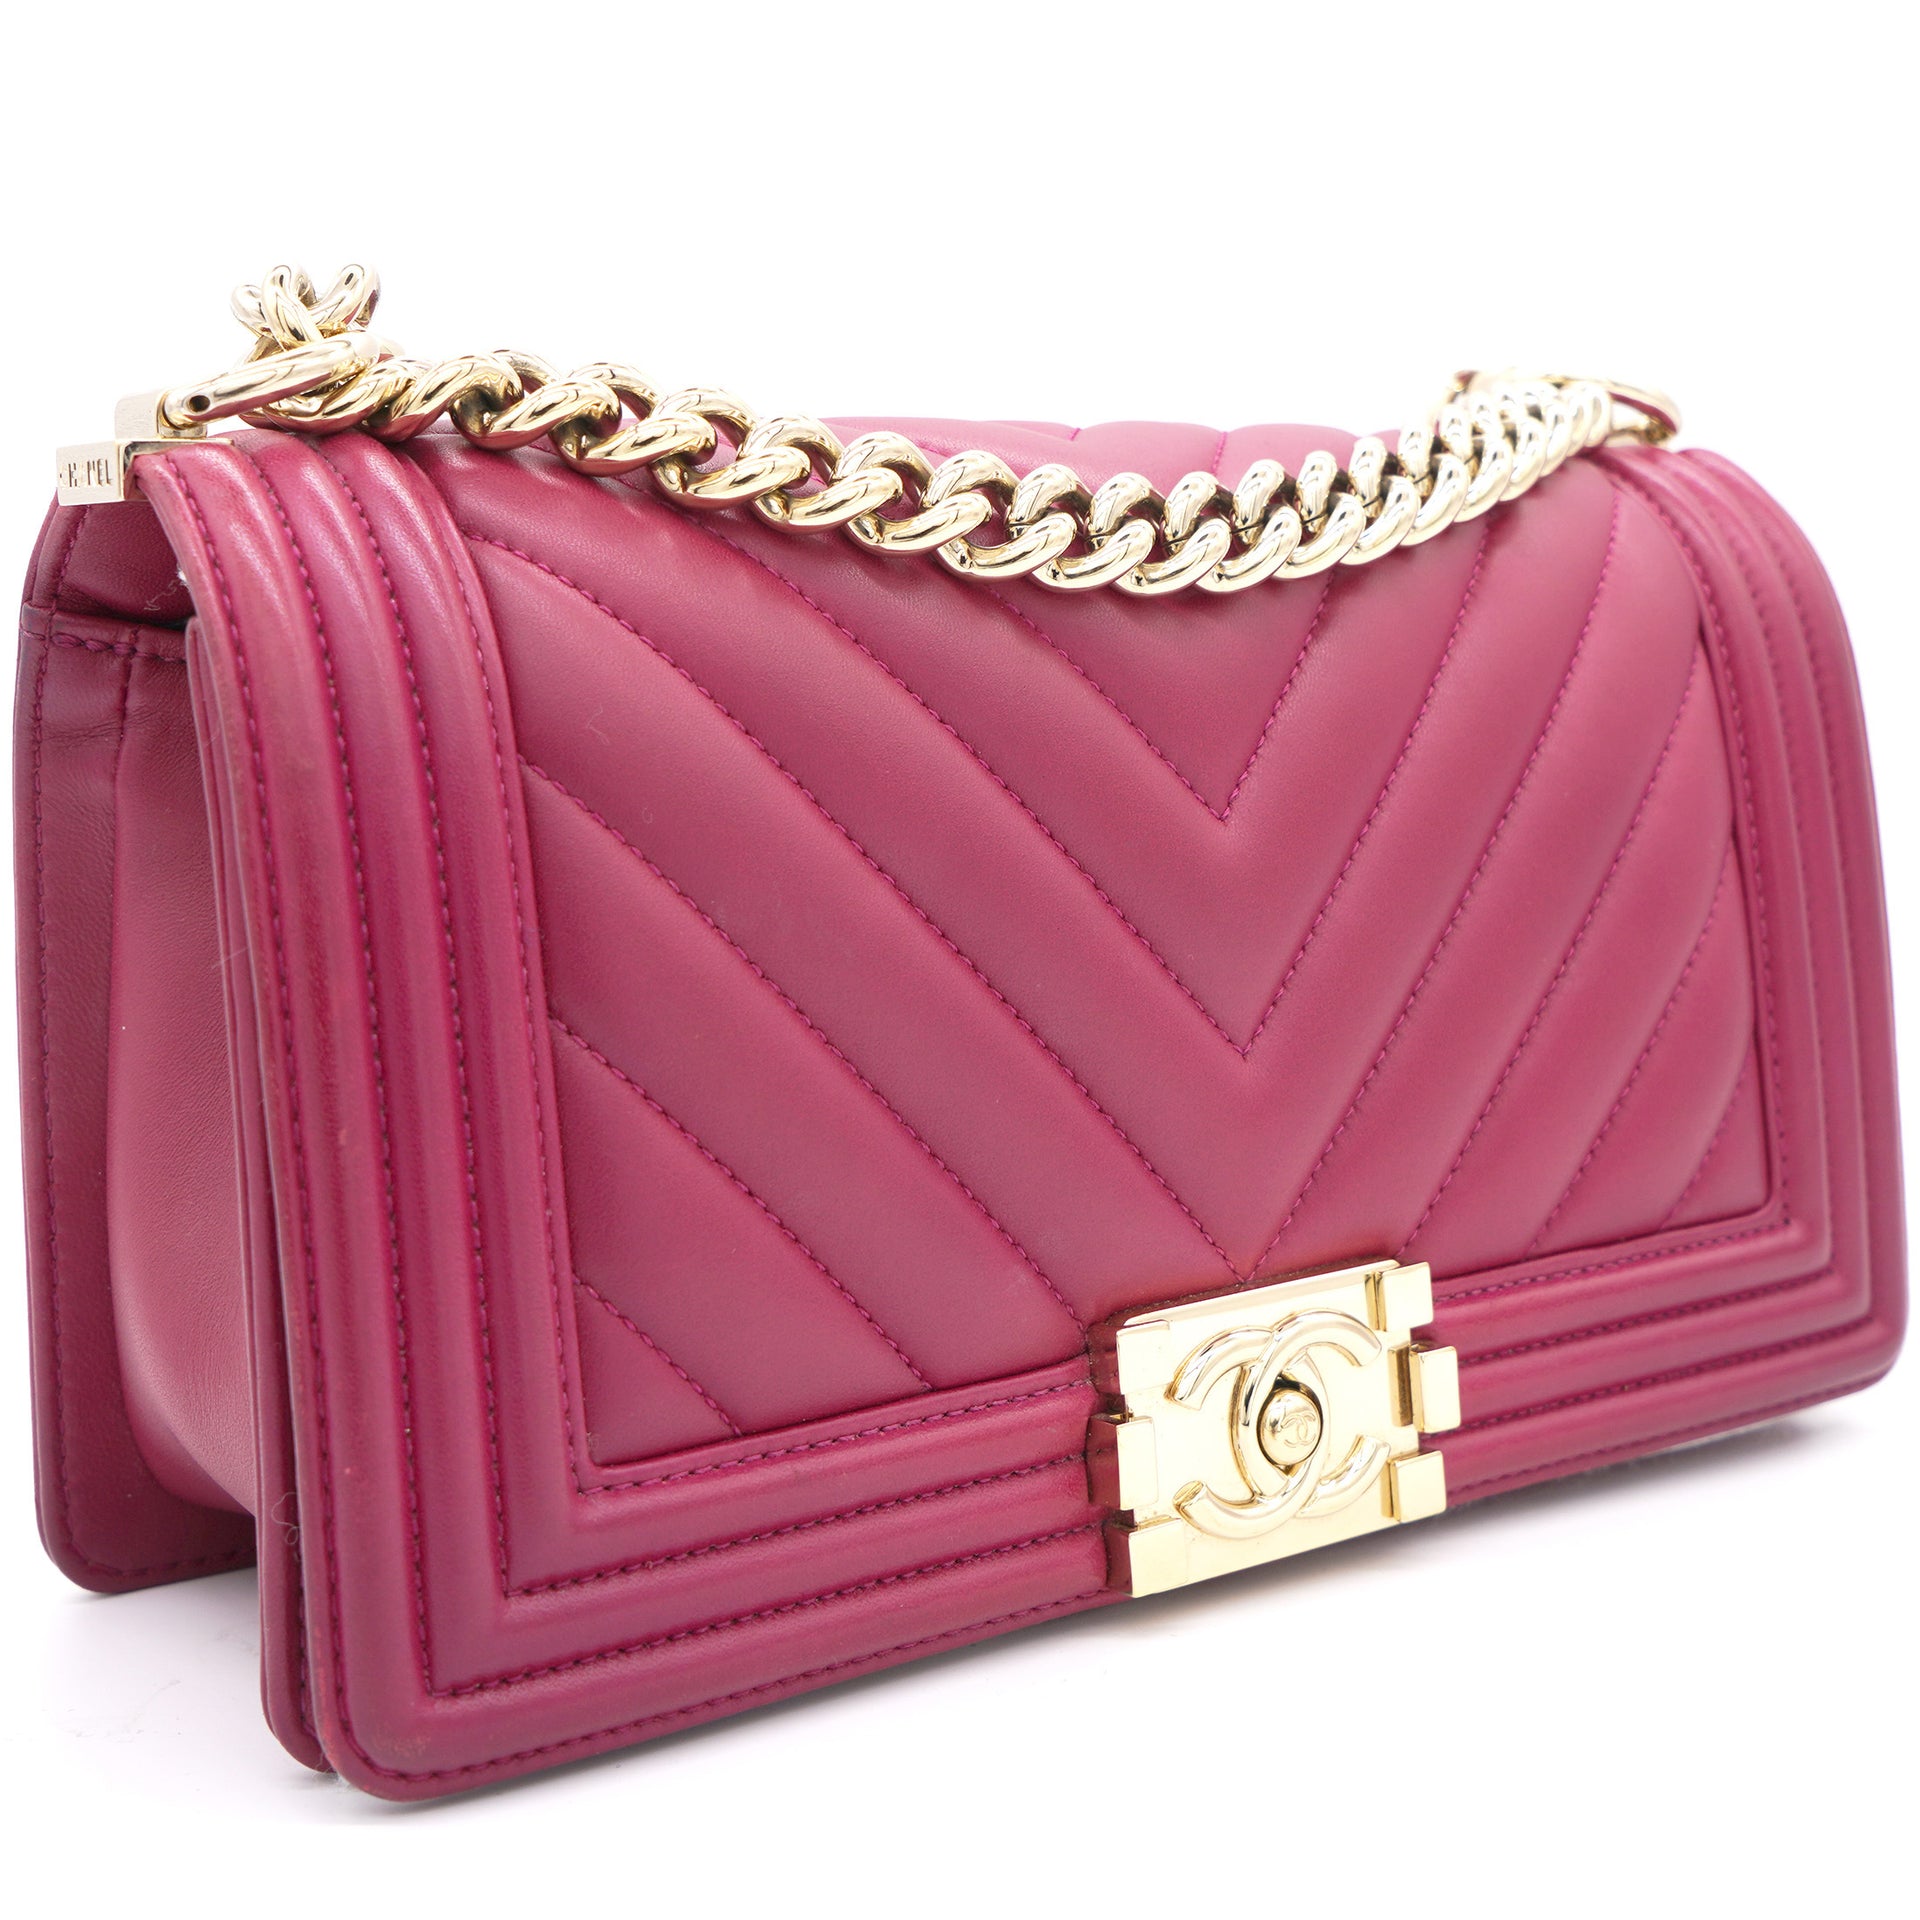 Chanel Lambskin Chevron Quilted Shoulder Bag Pink